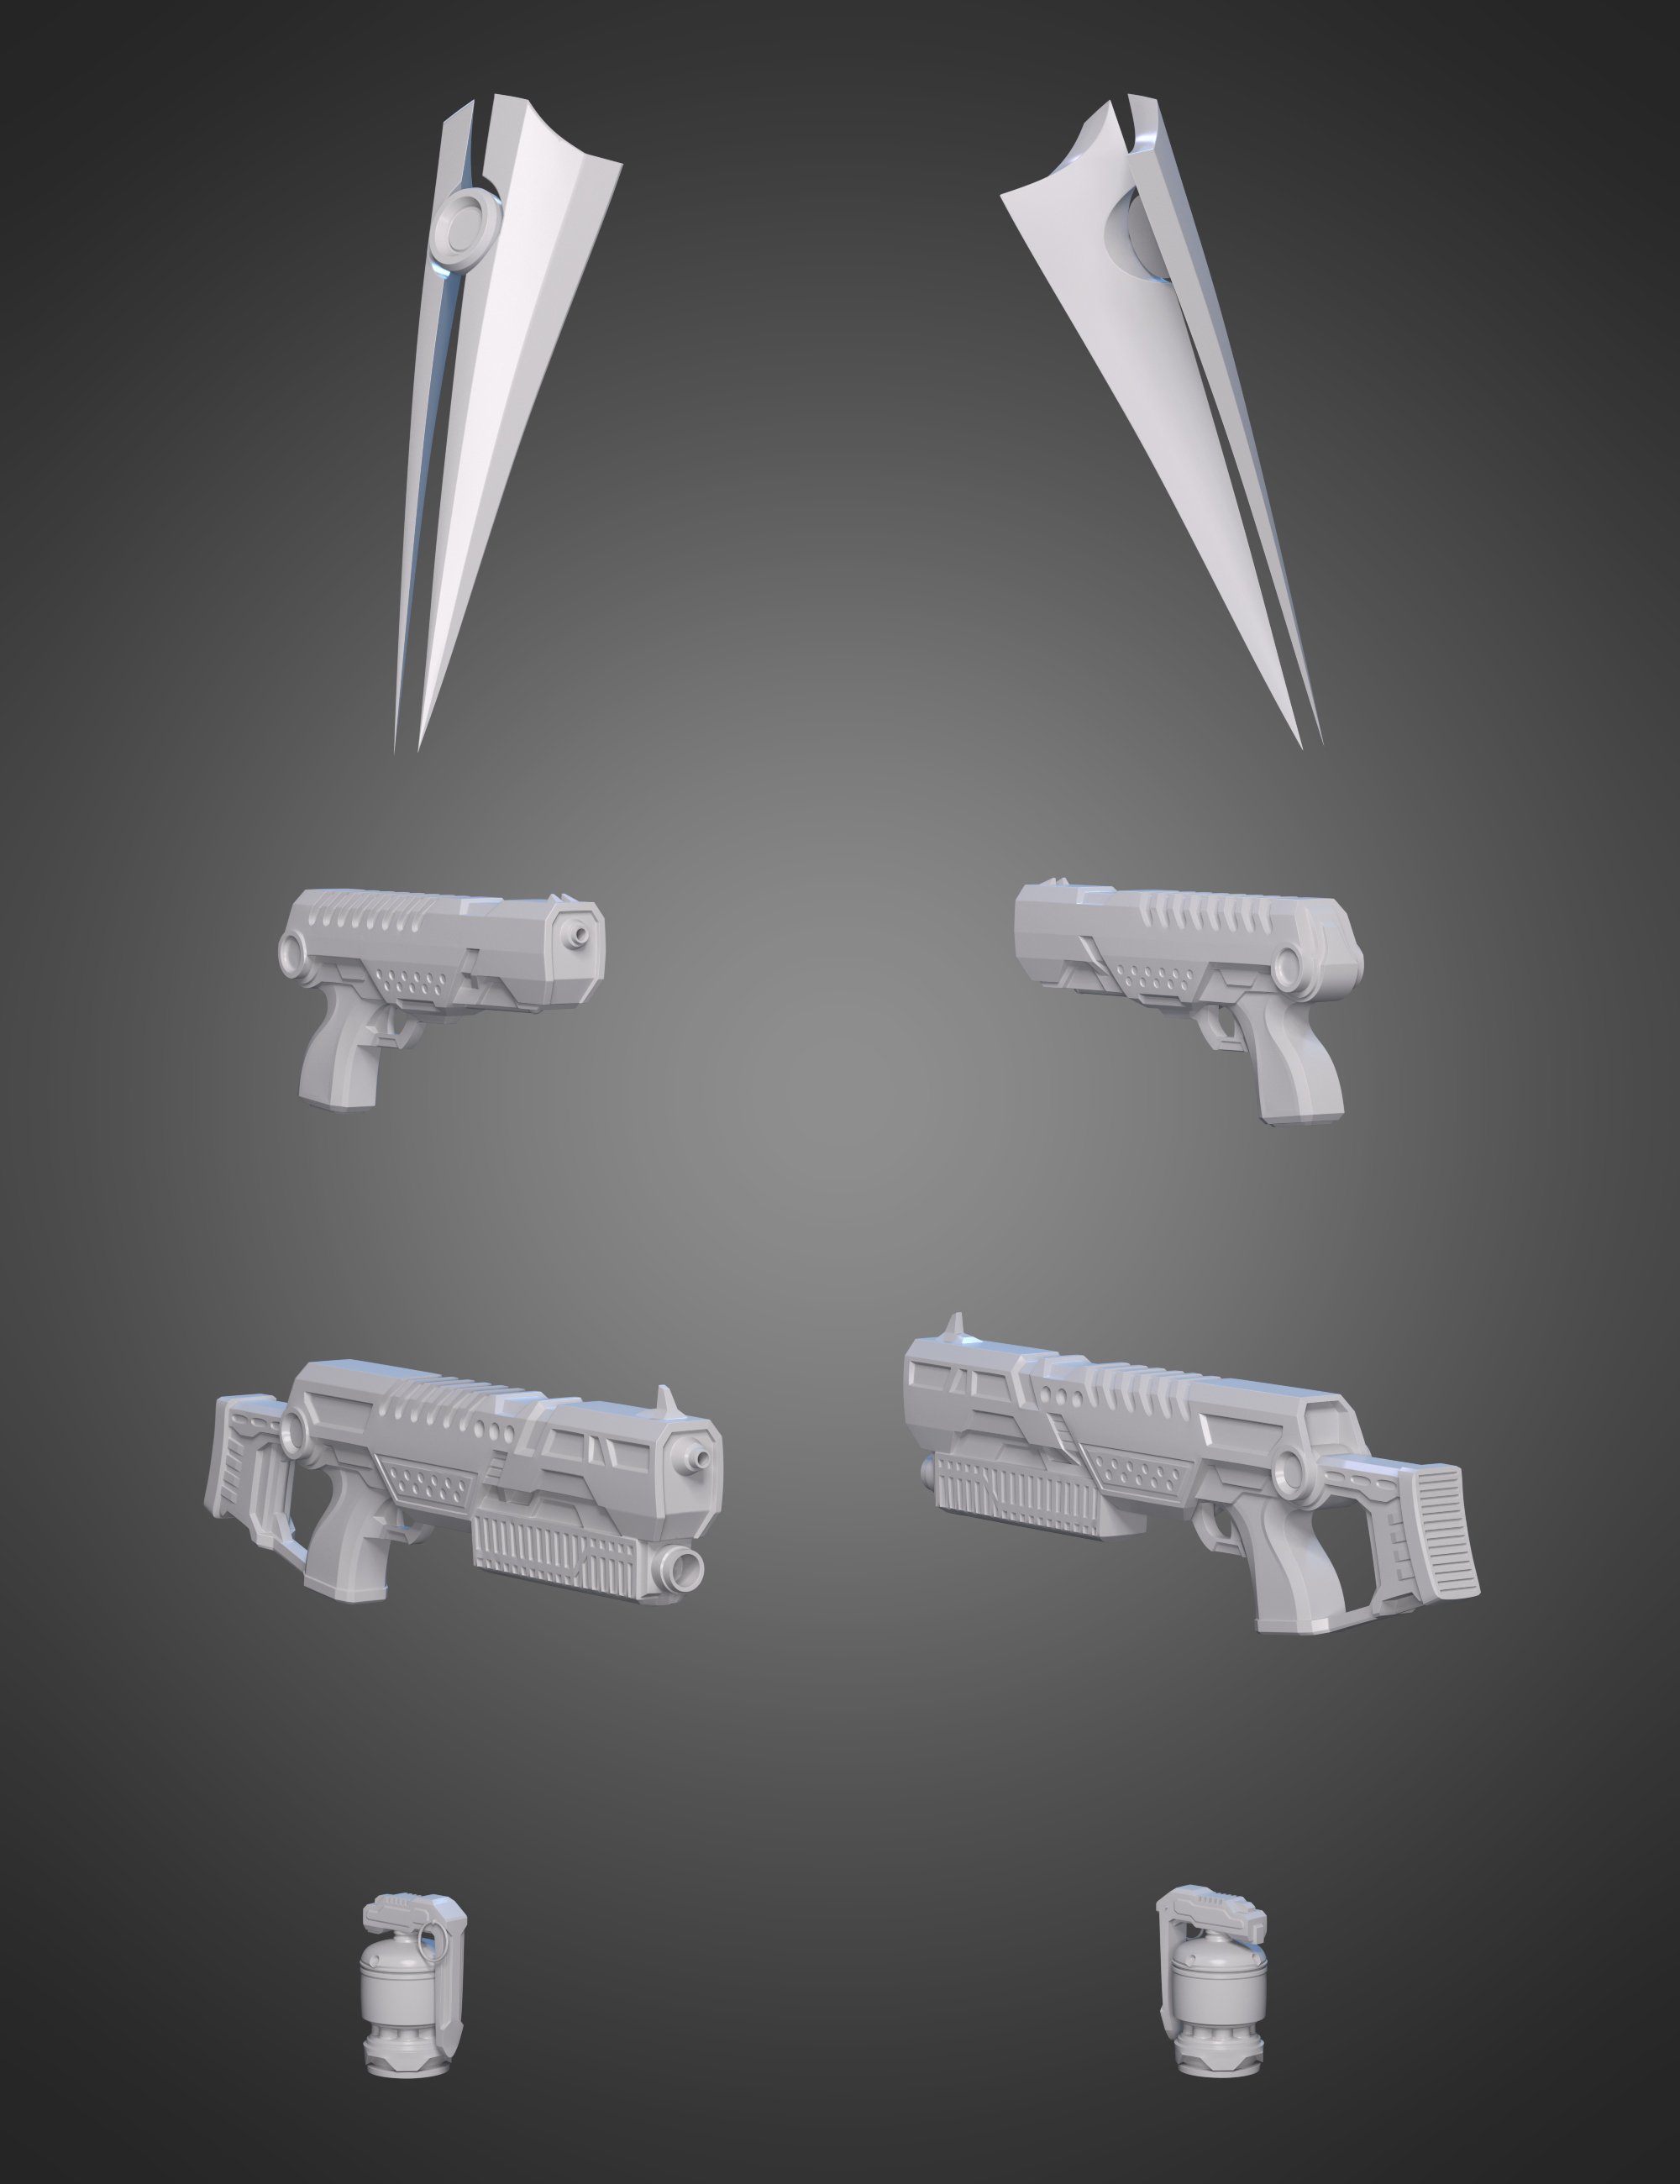 Intergalactic Soldier Weapons for Genesis 8.1 Males by: Luthbel, 3D Models by Daz 3D